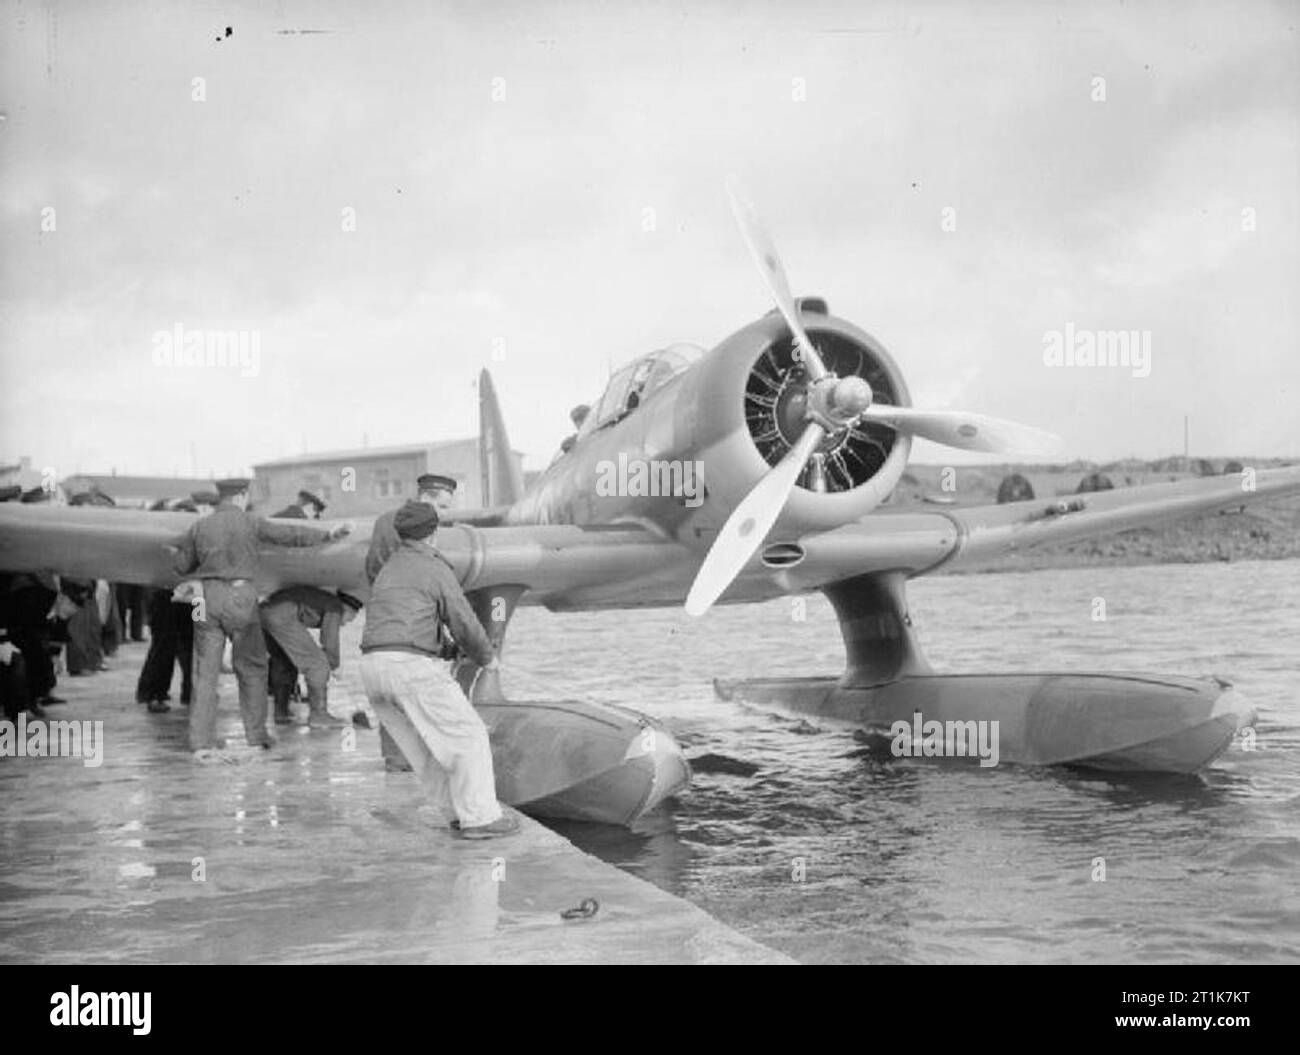 Royal Air Force 1939-1945- Coastal Command A Northrop N-3PB of the Norwegian-manned No 330 Squadron in Iceland, October 1941. Stock Photo